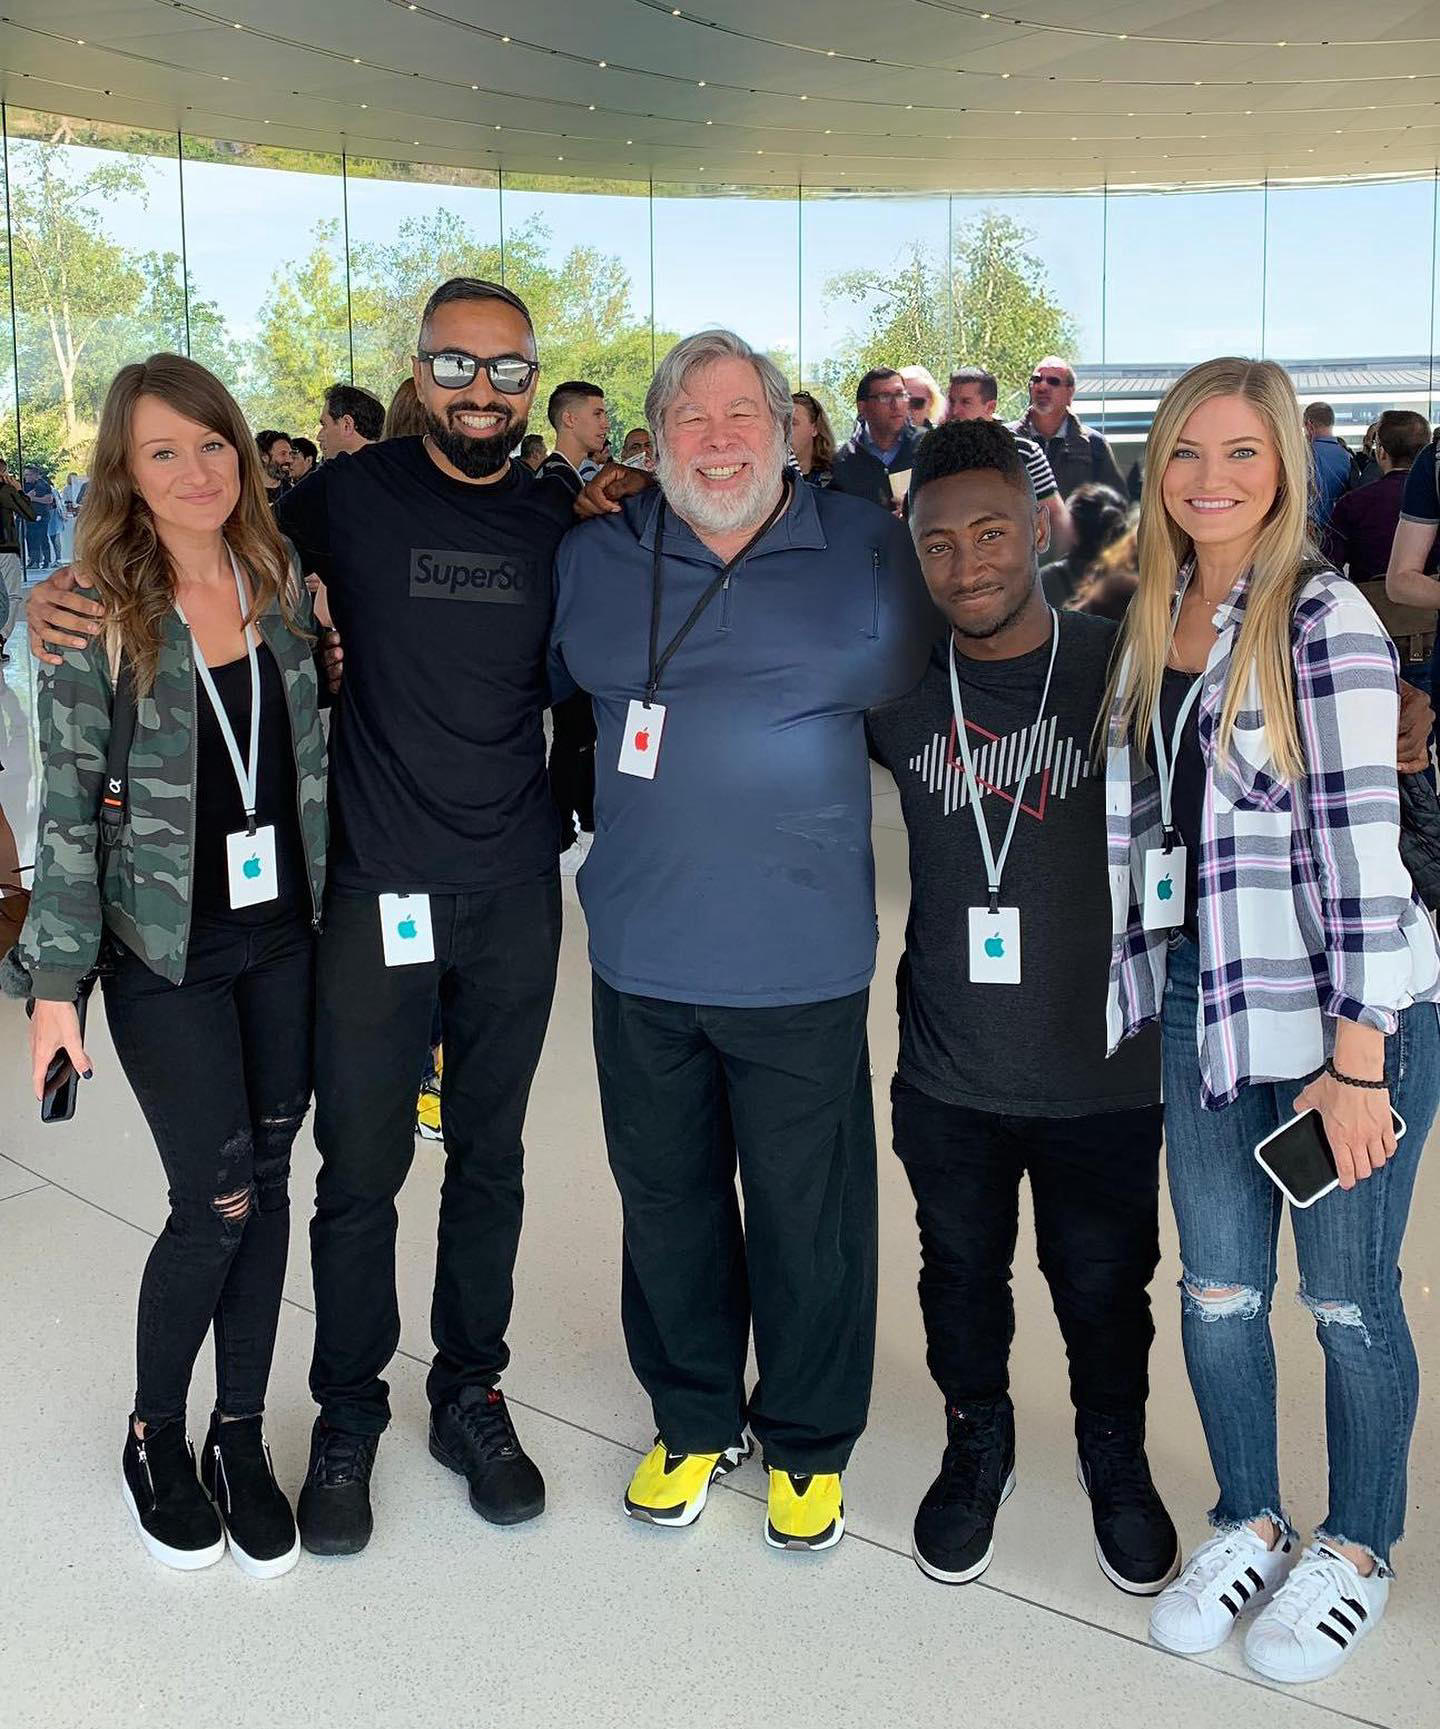 SuperSaf - Throwback to this day last year with the squad at the #AppleEvent